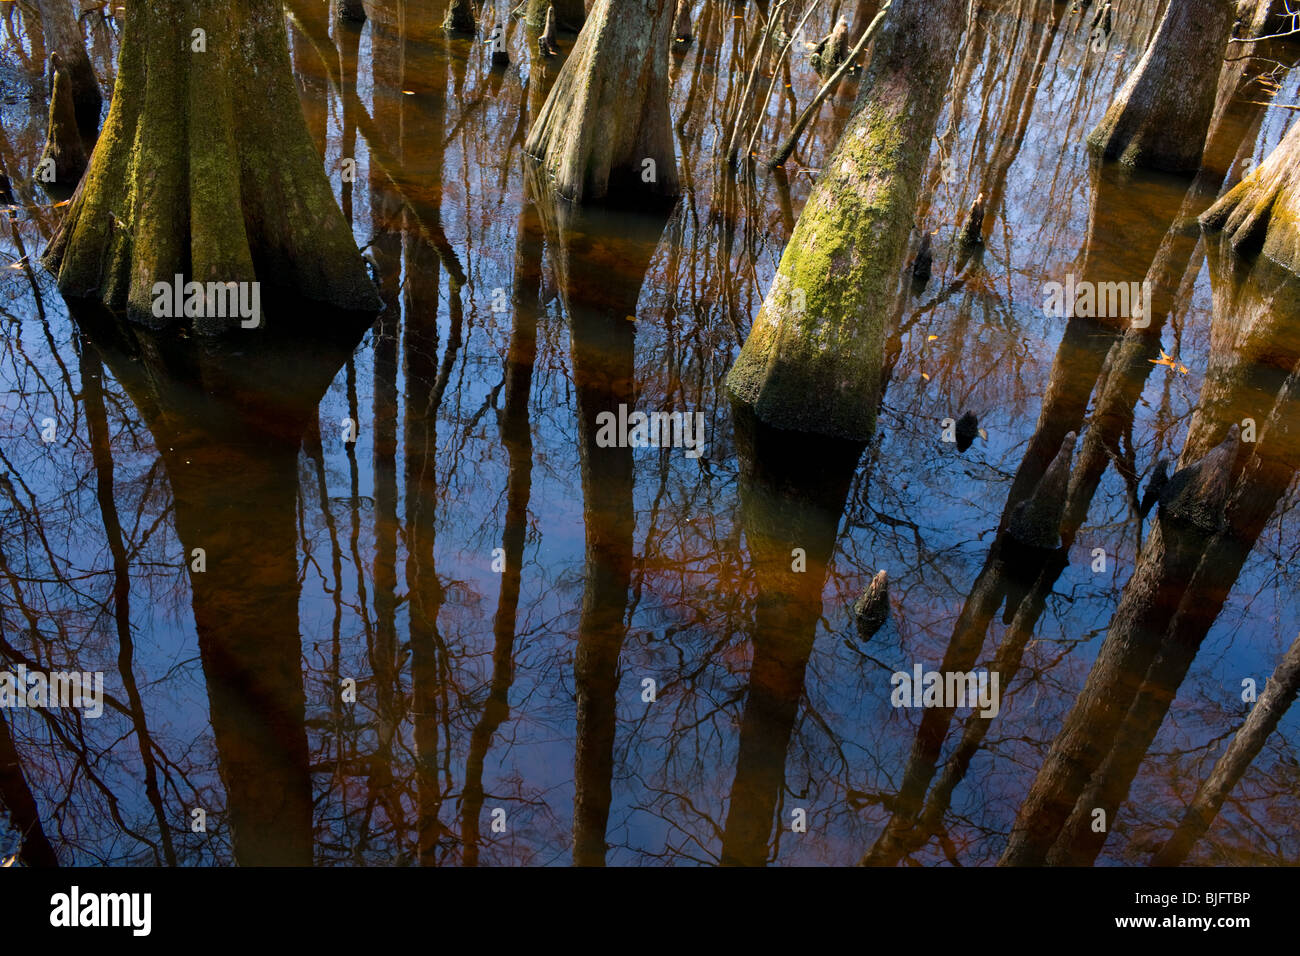 Cypress trees at Four Hole swamp, Francis Beidler Forest, Audubon Center in South Carolina Stock Photo